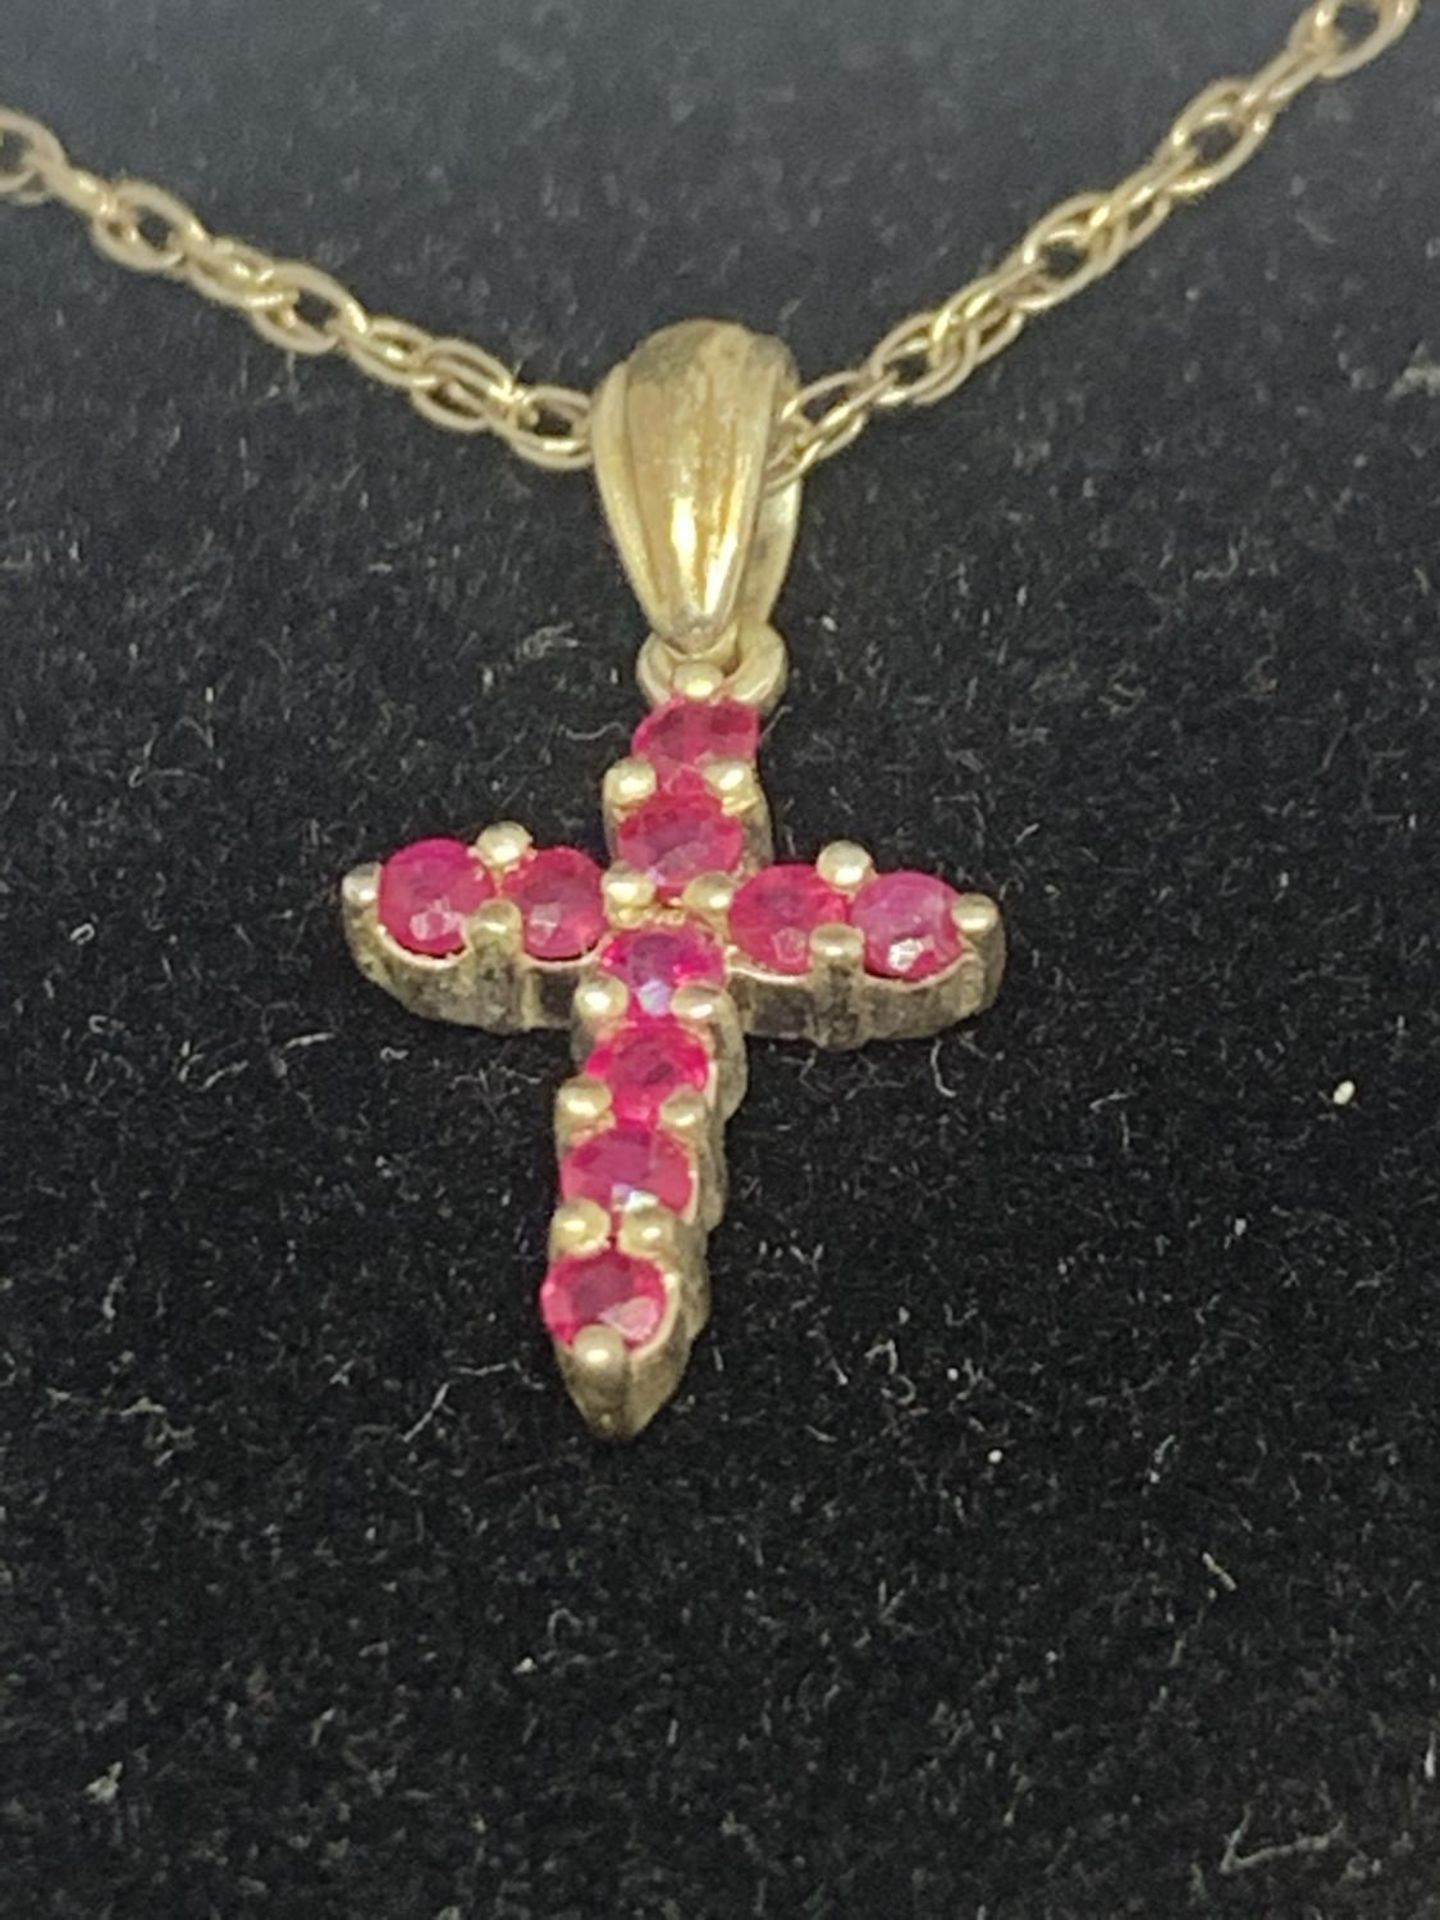 A SILVER NECKLACE WITH A RUBY CROSS PENDANT AND A PAIR OF MATCHING EARRINGS IN A PRESENTATION BOX - Image 3 of 4